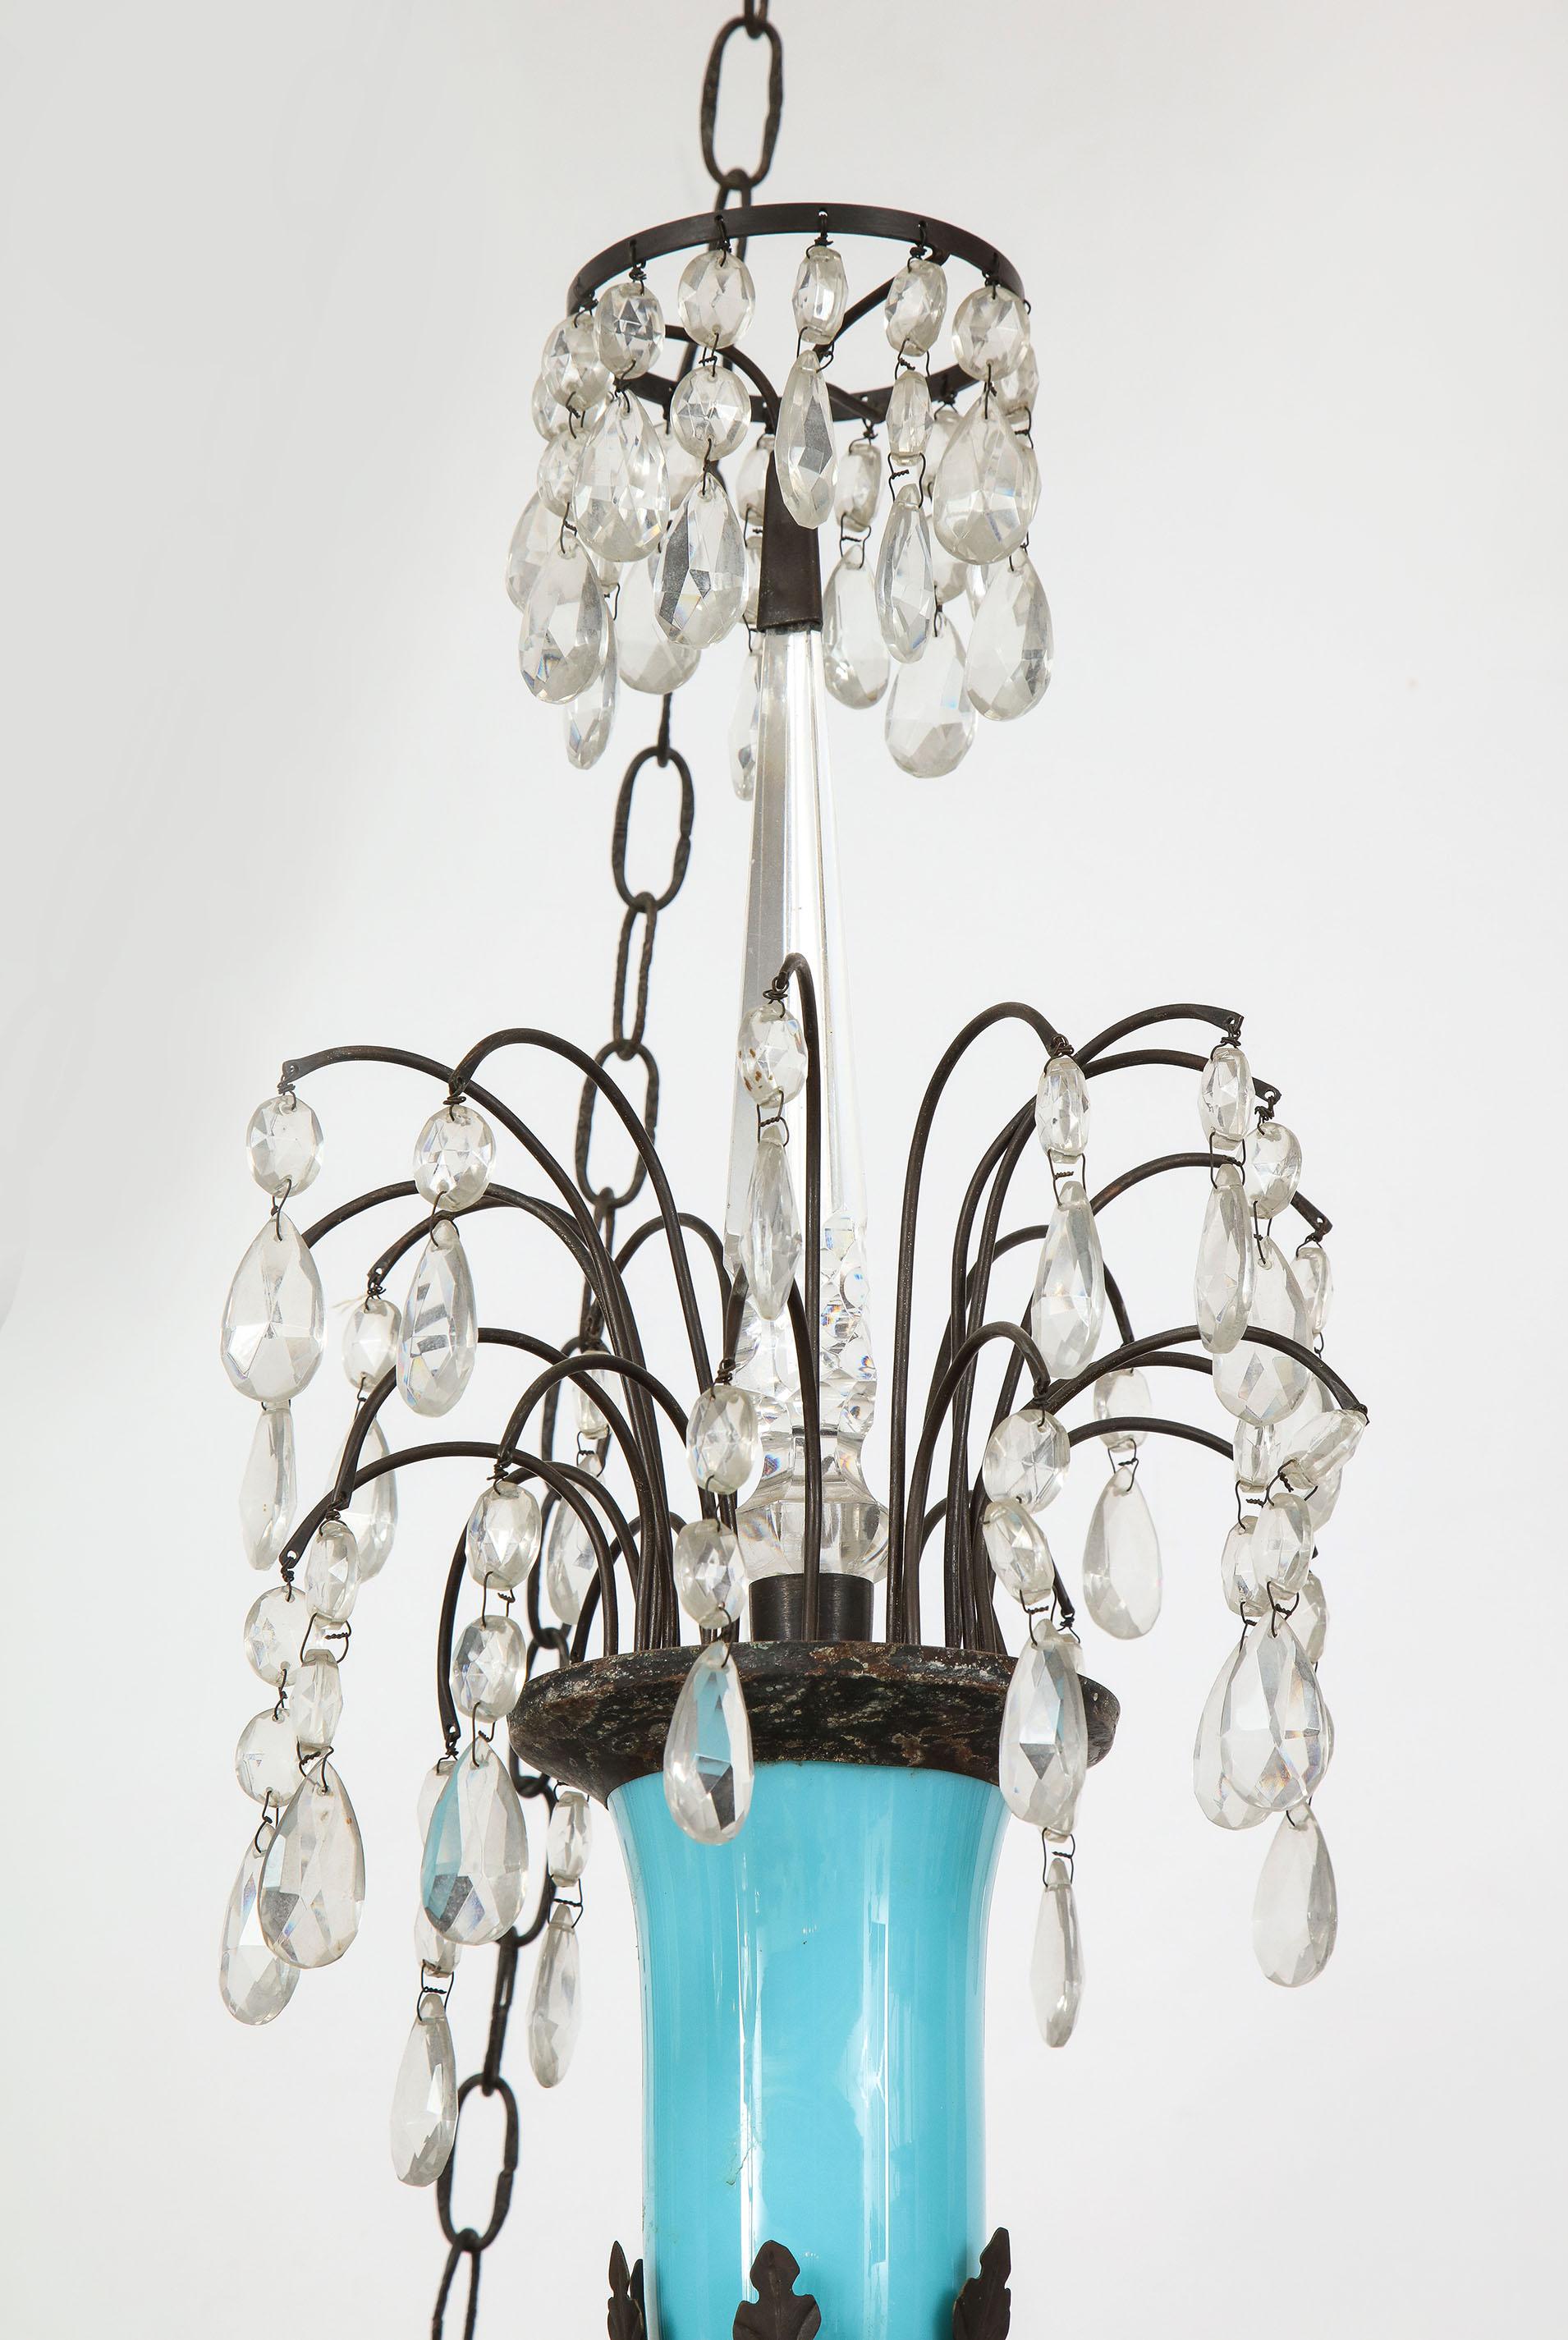 Swedish Neo-Classic crystal chandelier

The Swedish Neo-Classic chandelier with a woven crystal basket suspended from a ring of 12 candles arms (the ring itself electrified), supporting a central stem with turquoise glass and a spray of crystals